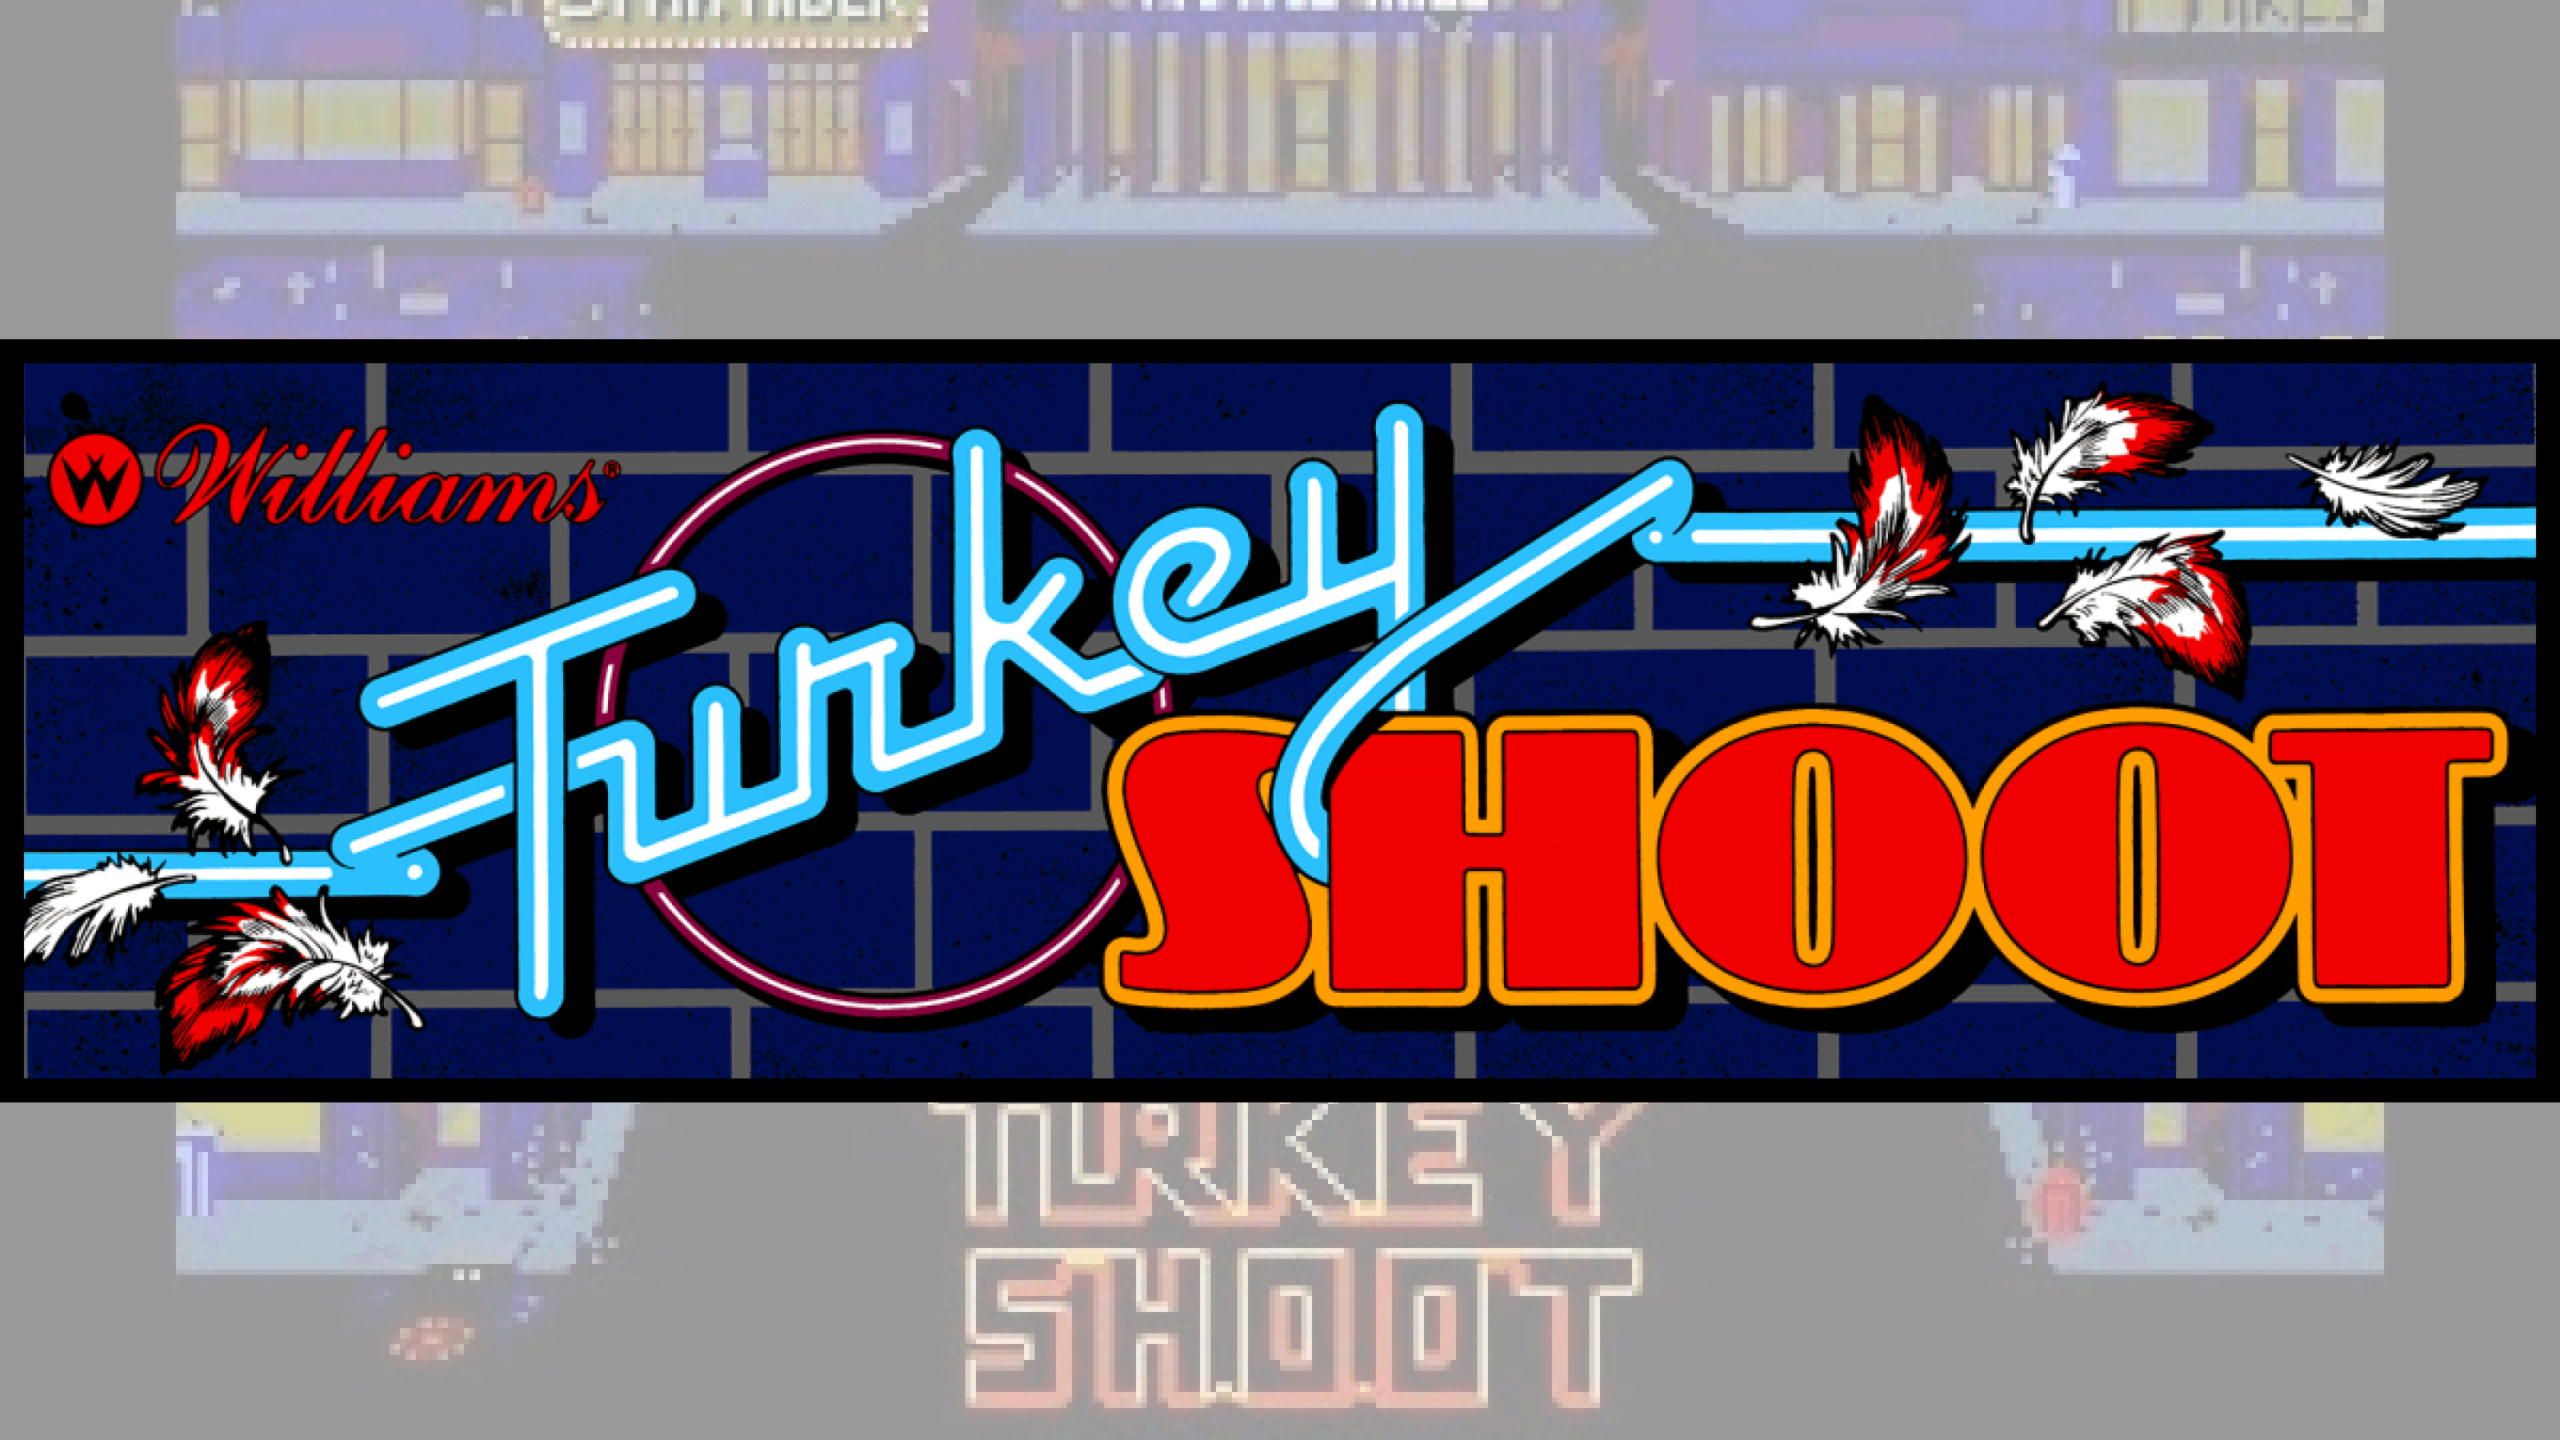 Read more about the article A World of Games: Turkey Shoot